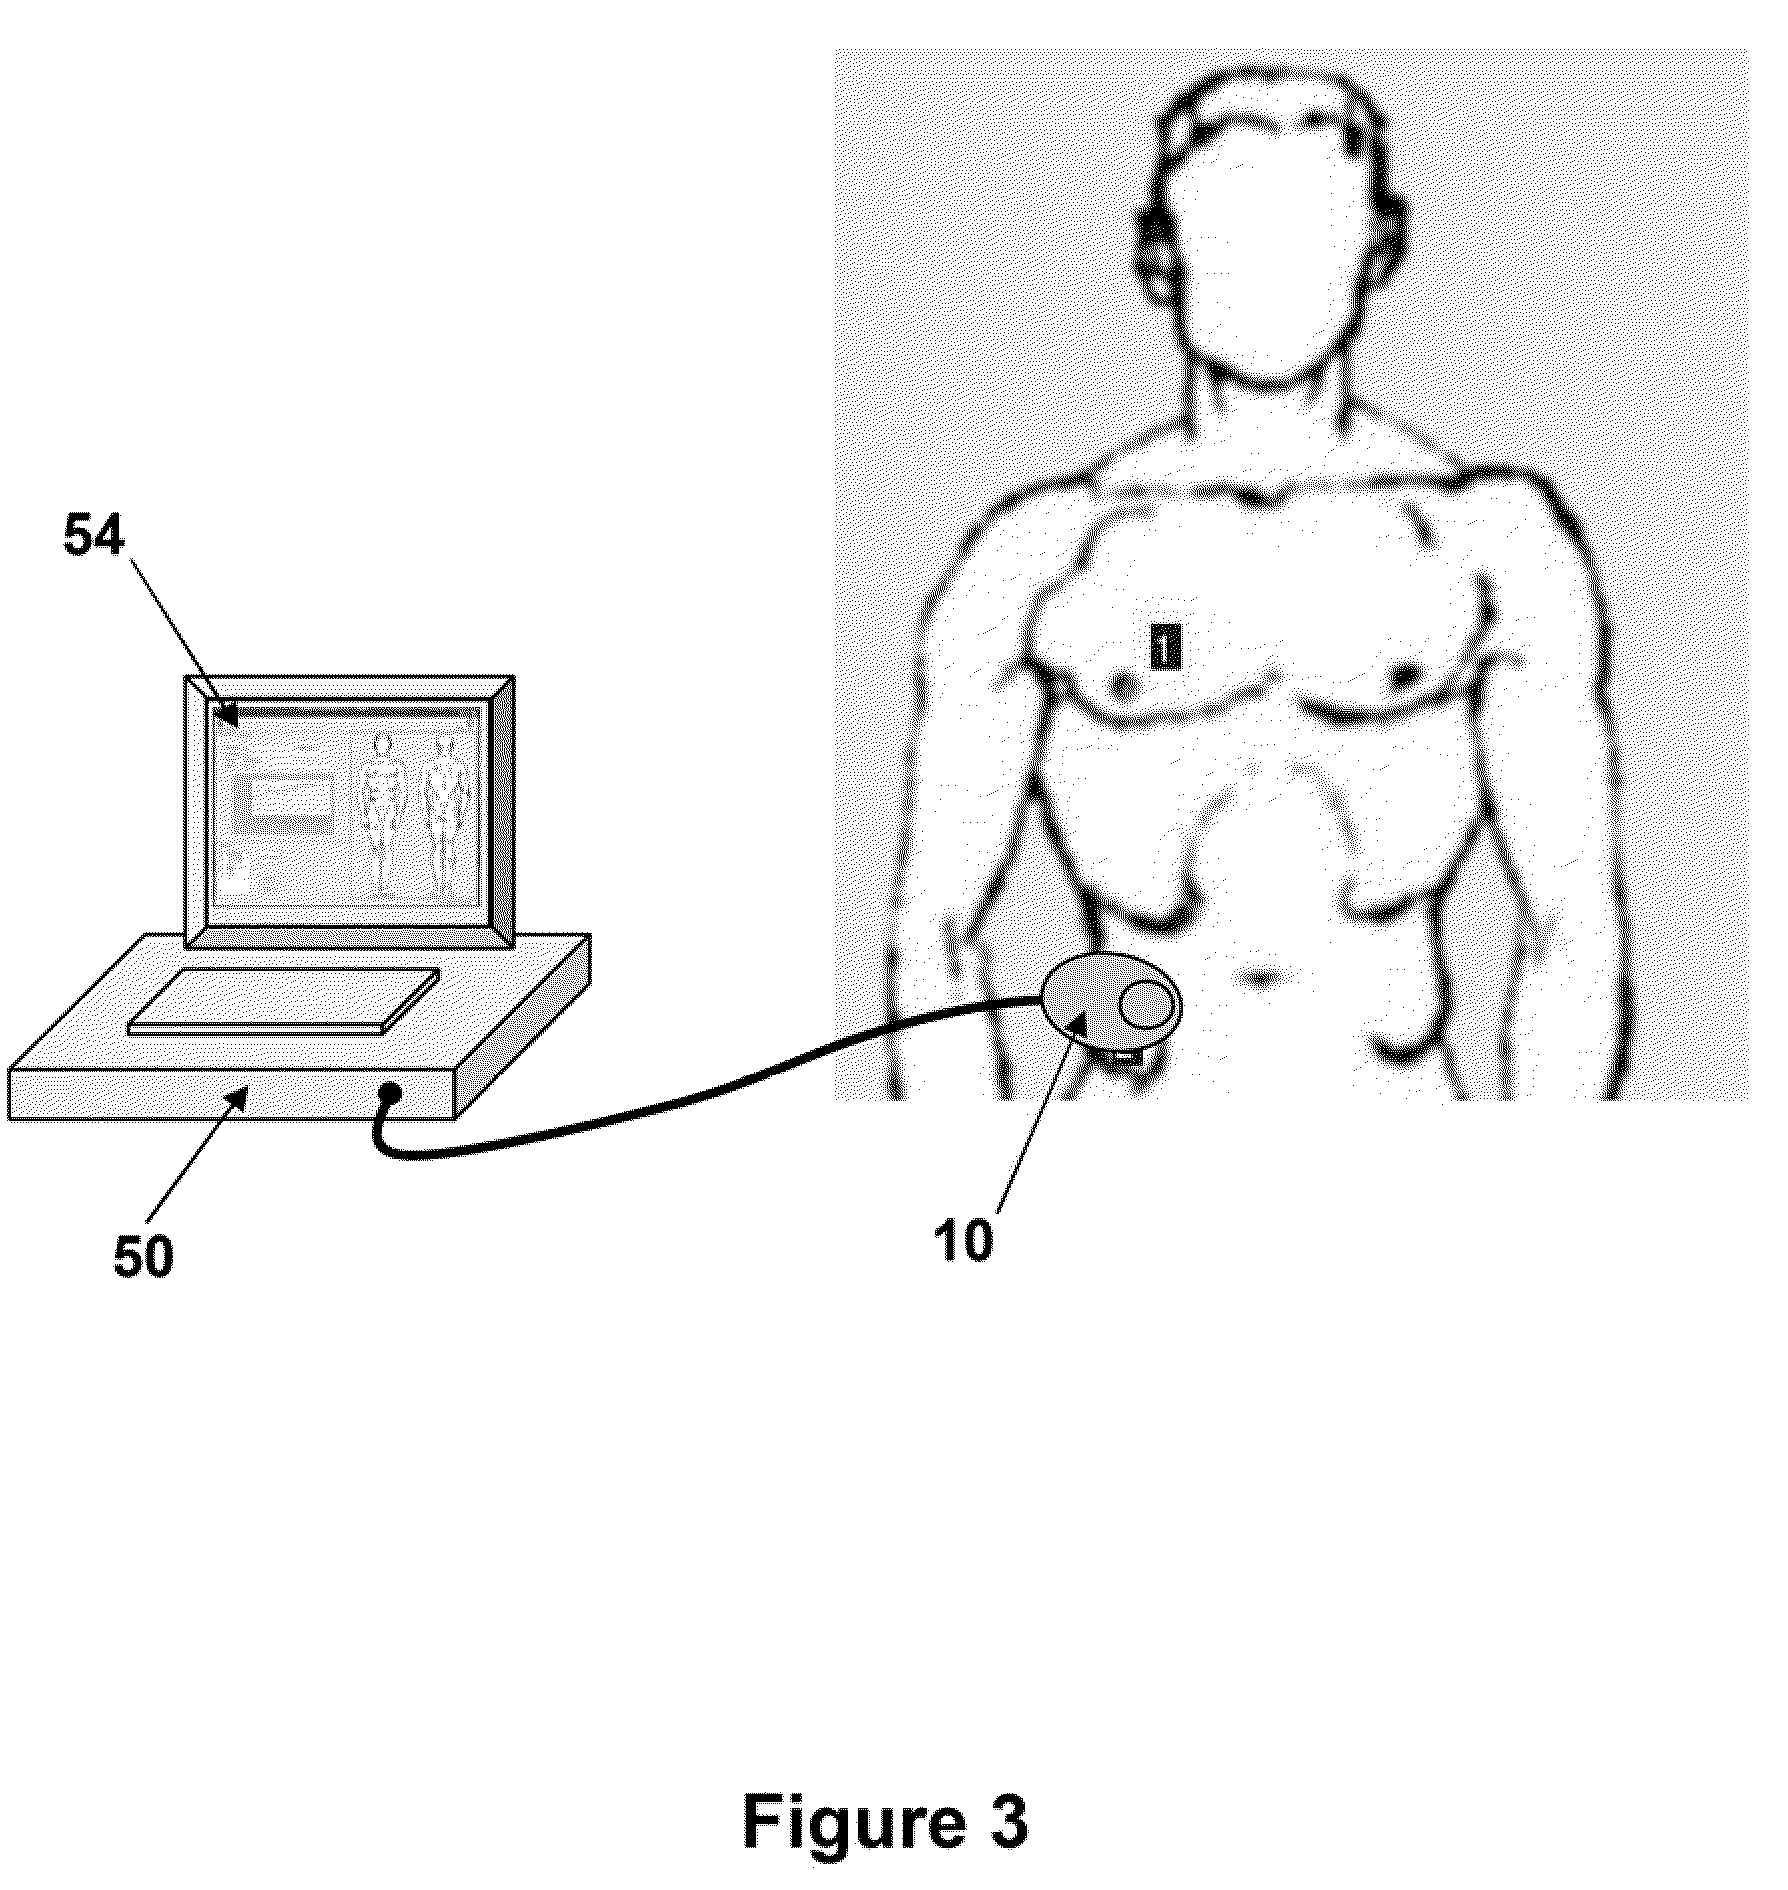 Tissue thickness and structure measurement device